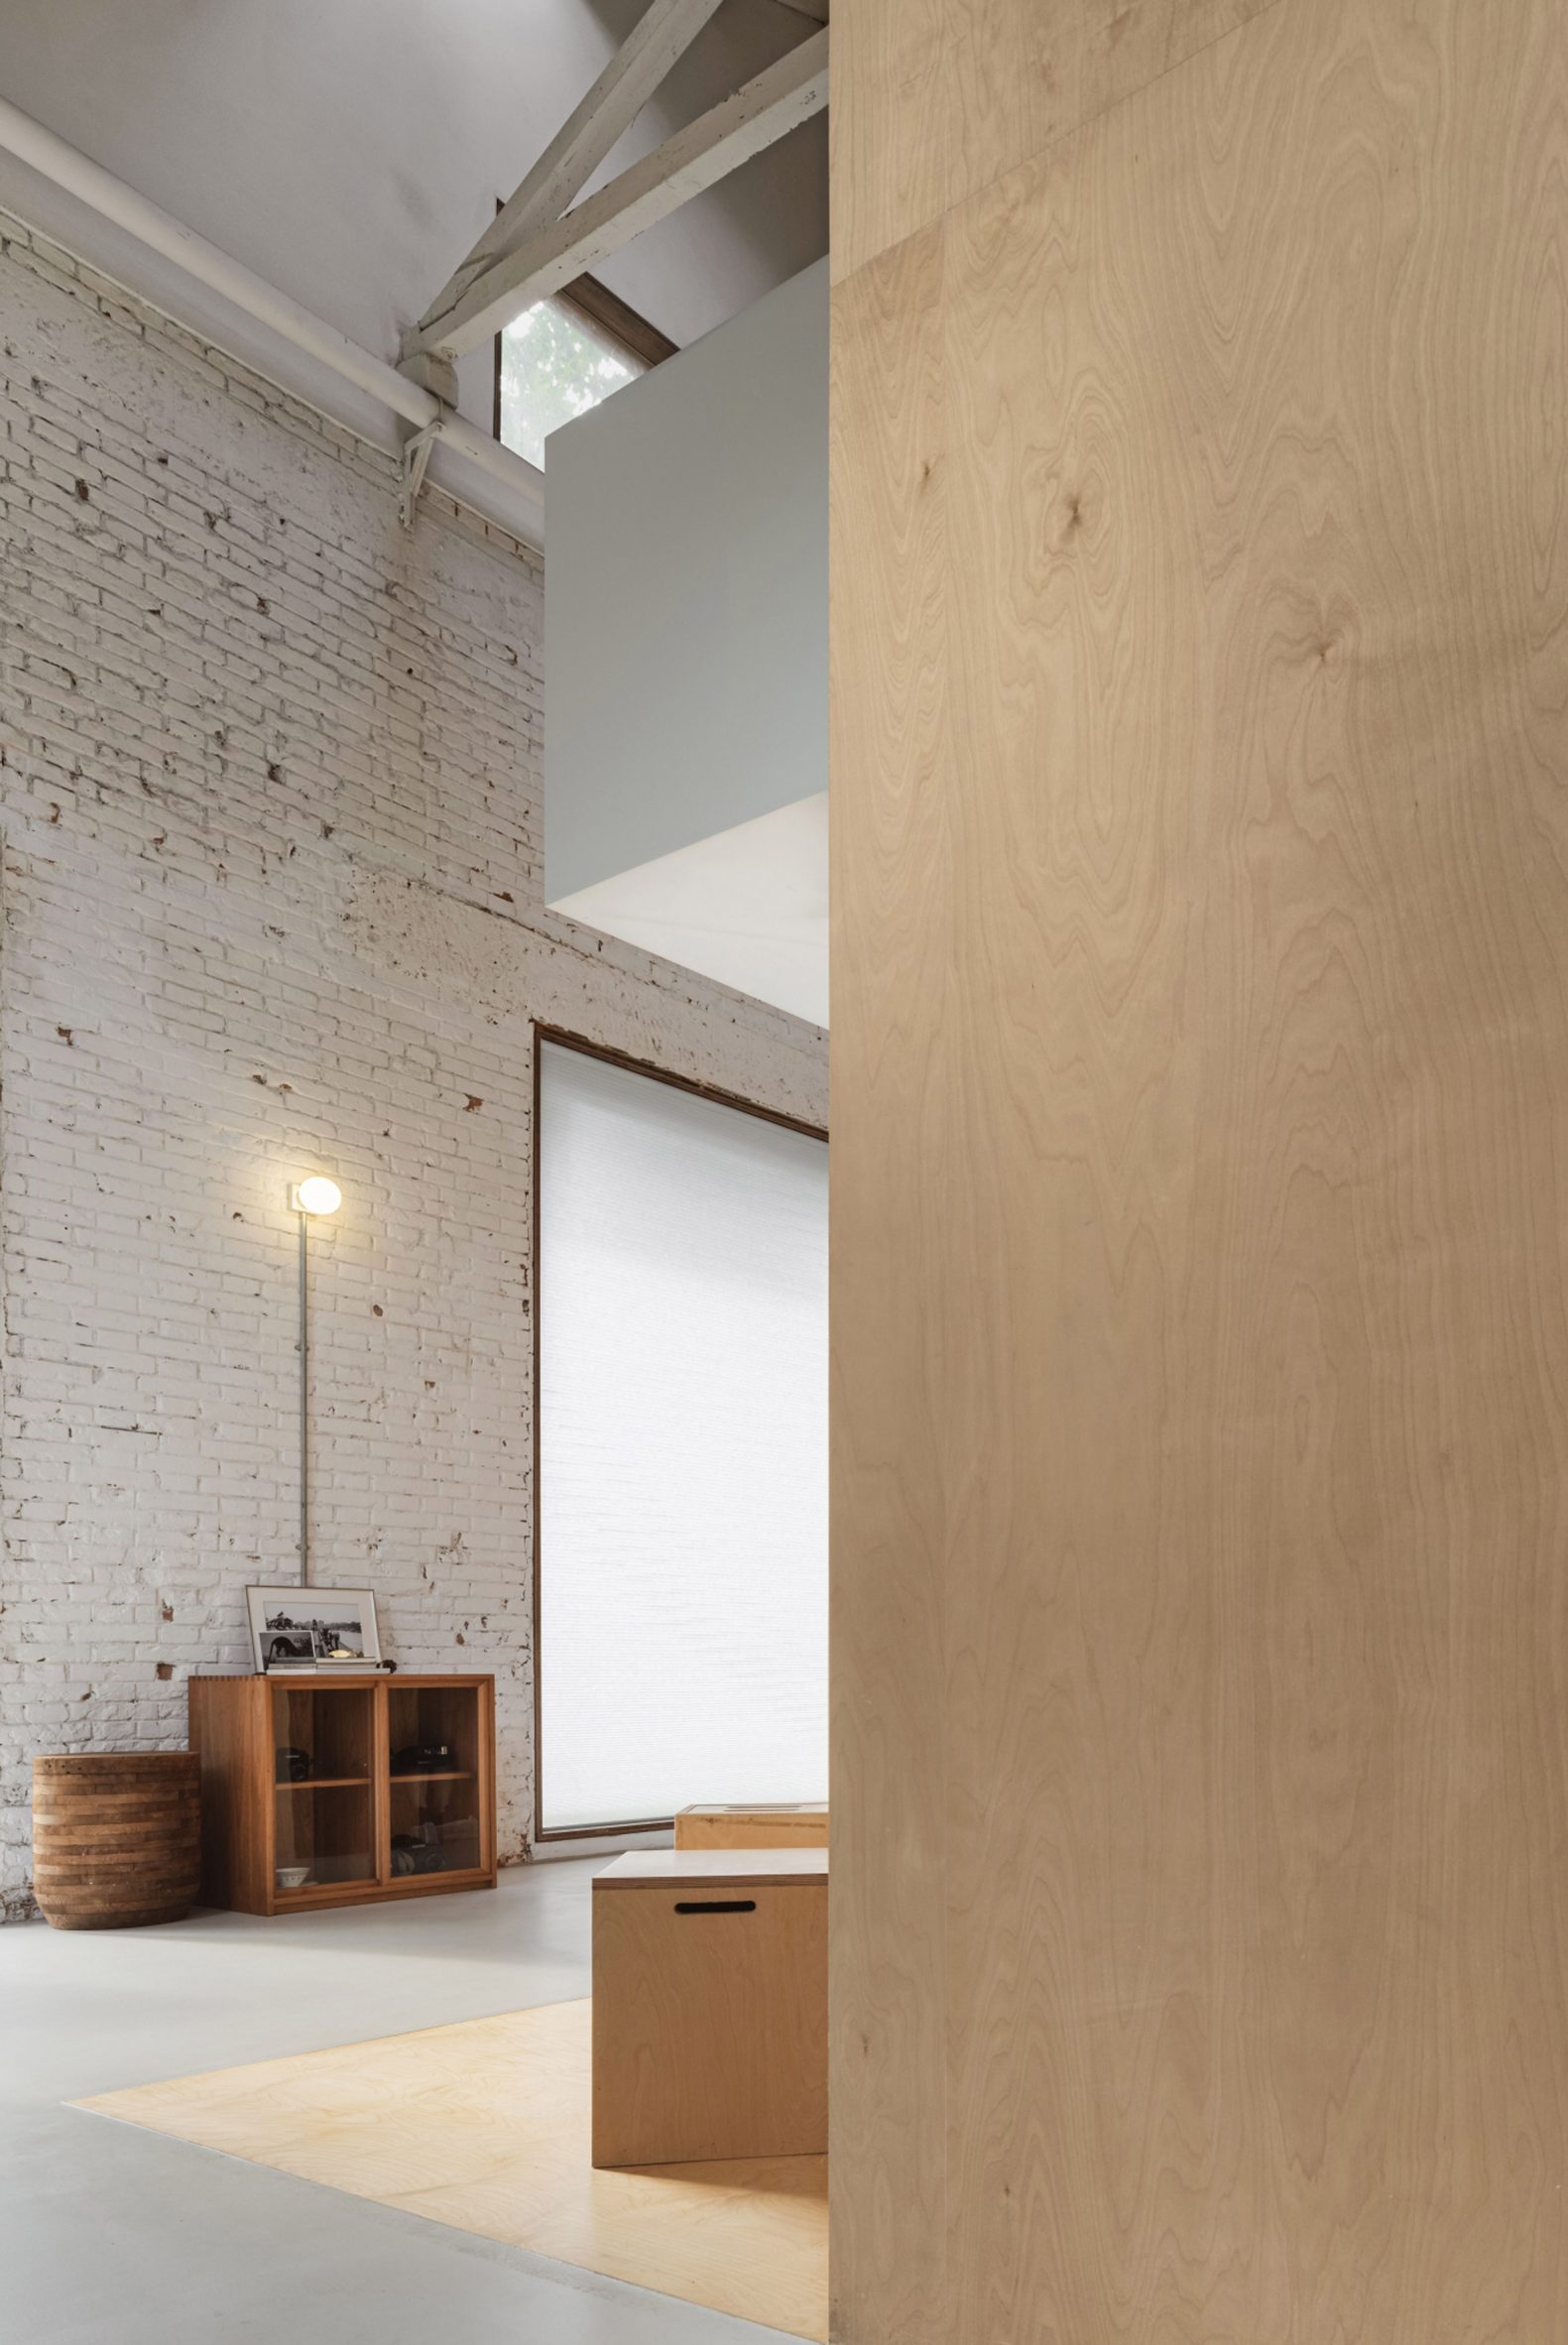 Interior image of the HNS Studio and timber volume